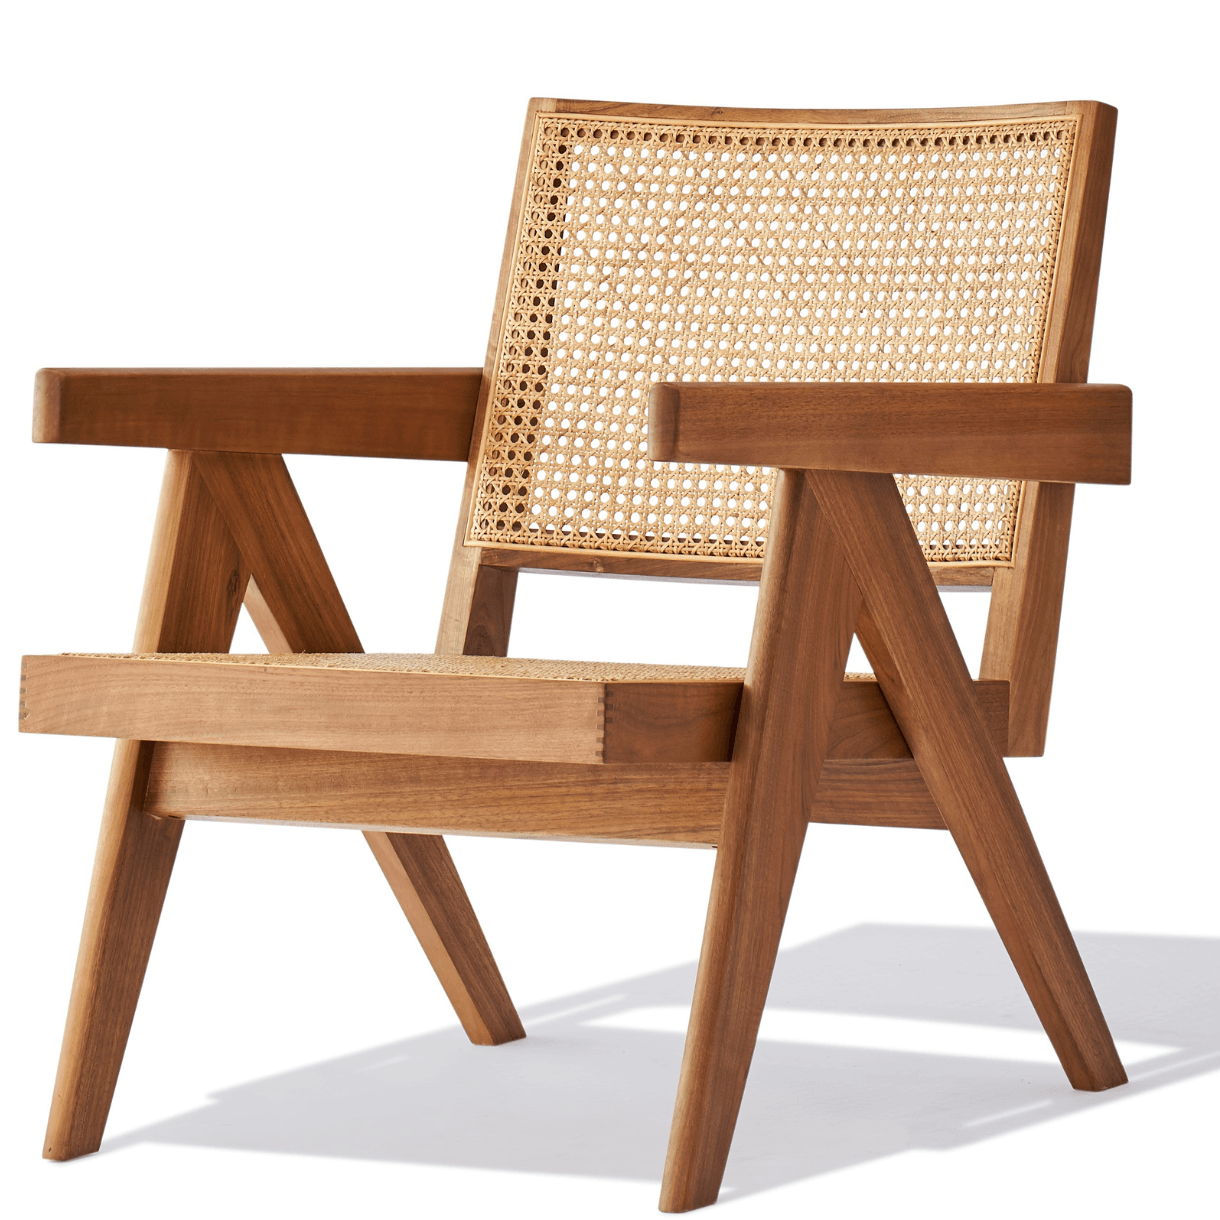 Teak Dining Chairs Outdoor